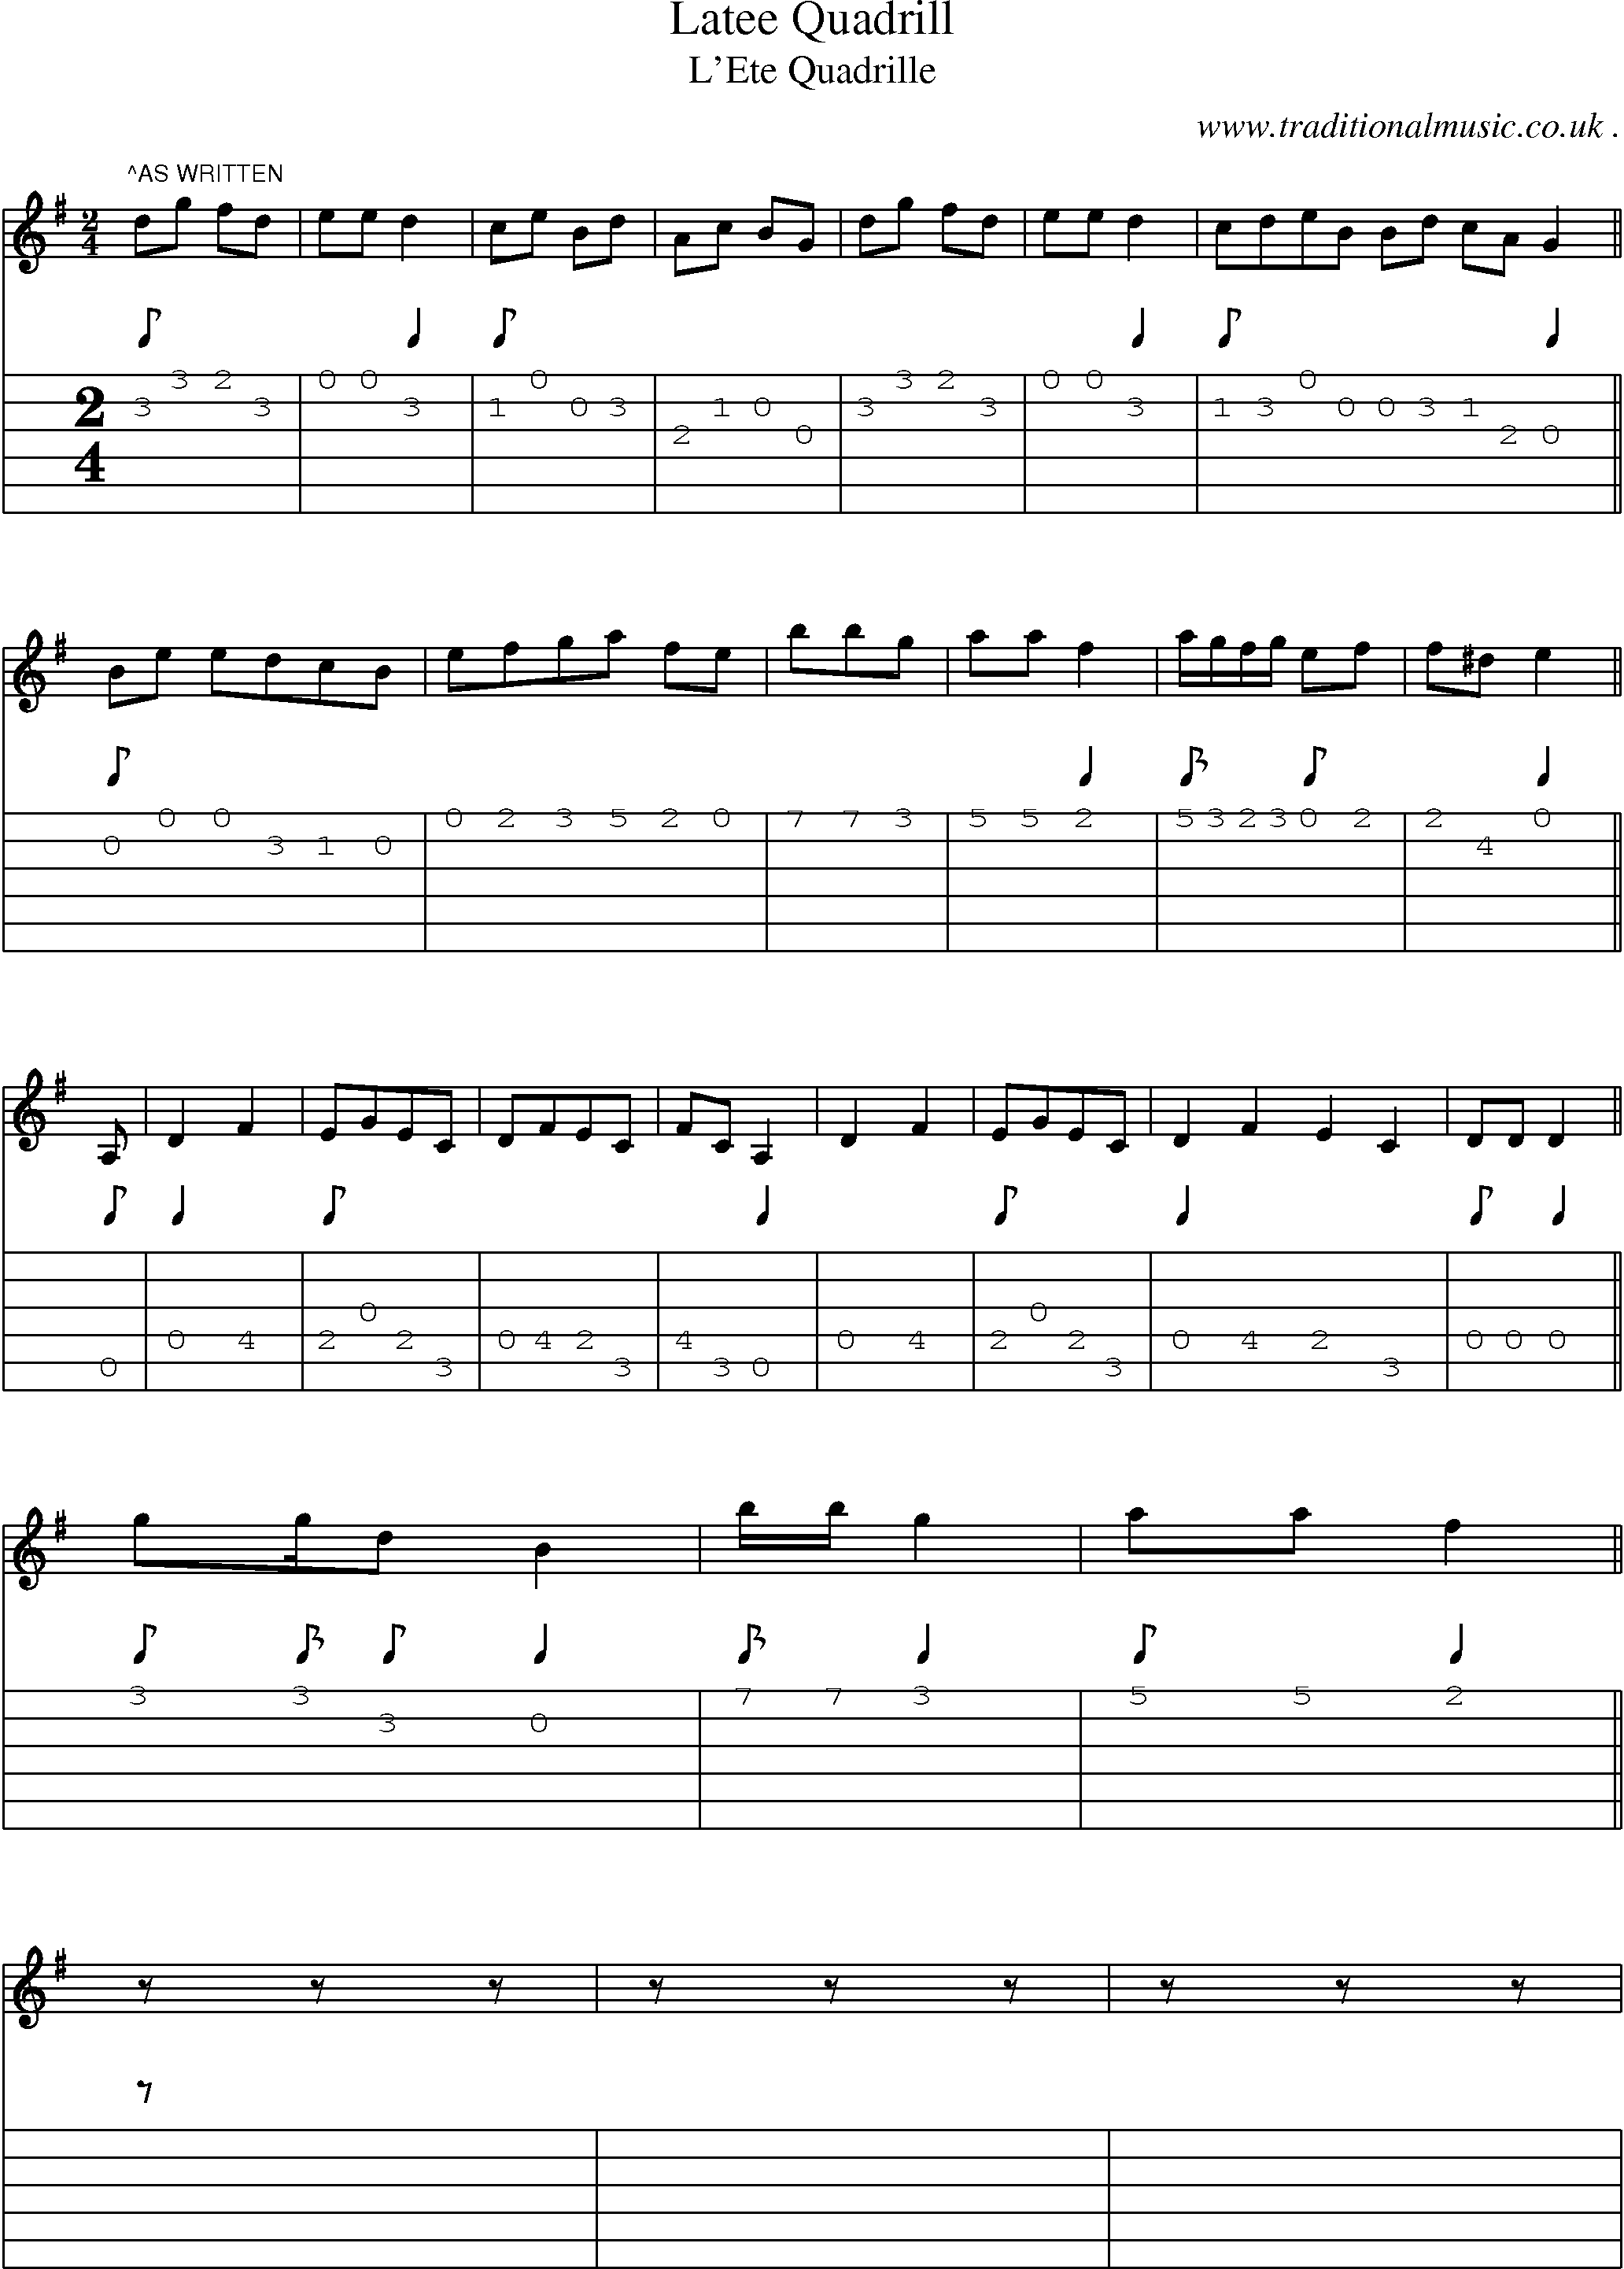 Sheet-Music and Guitar Tabs for Latee Quadrill